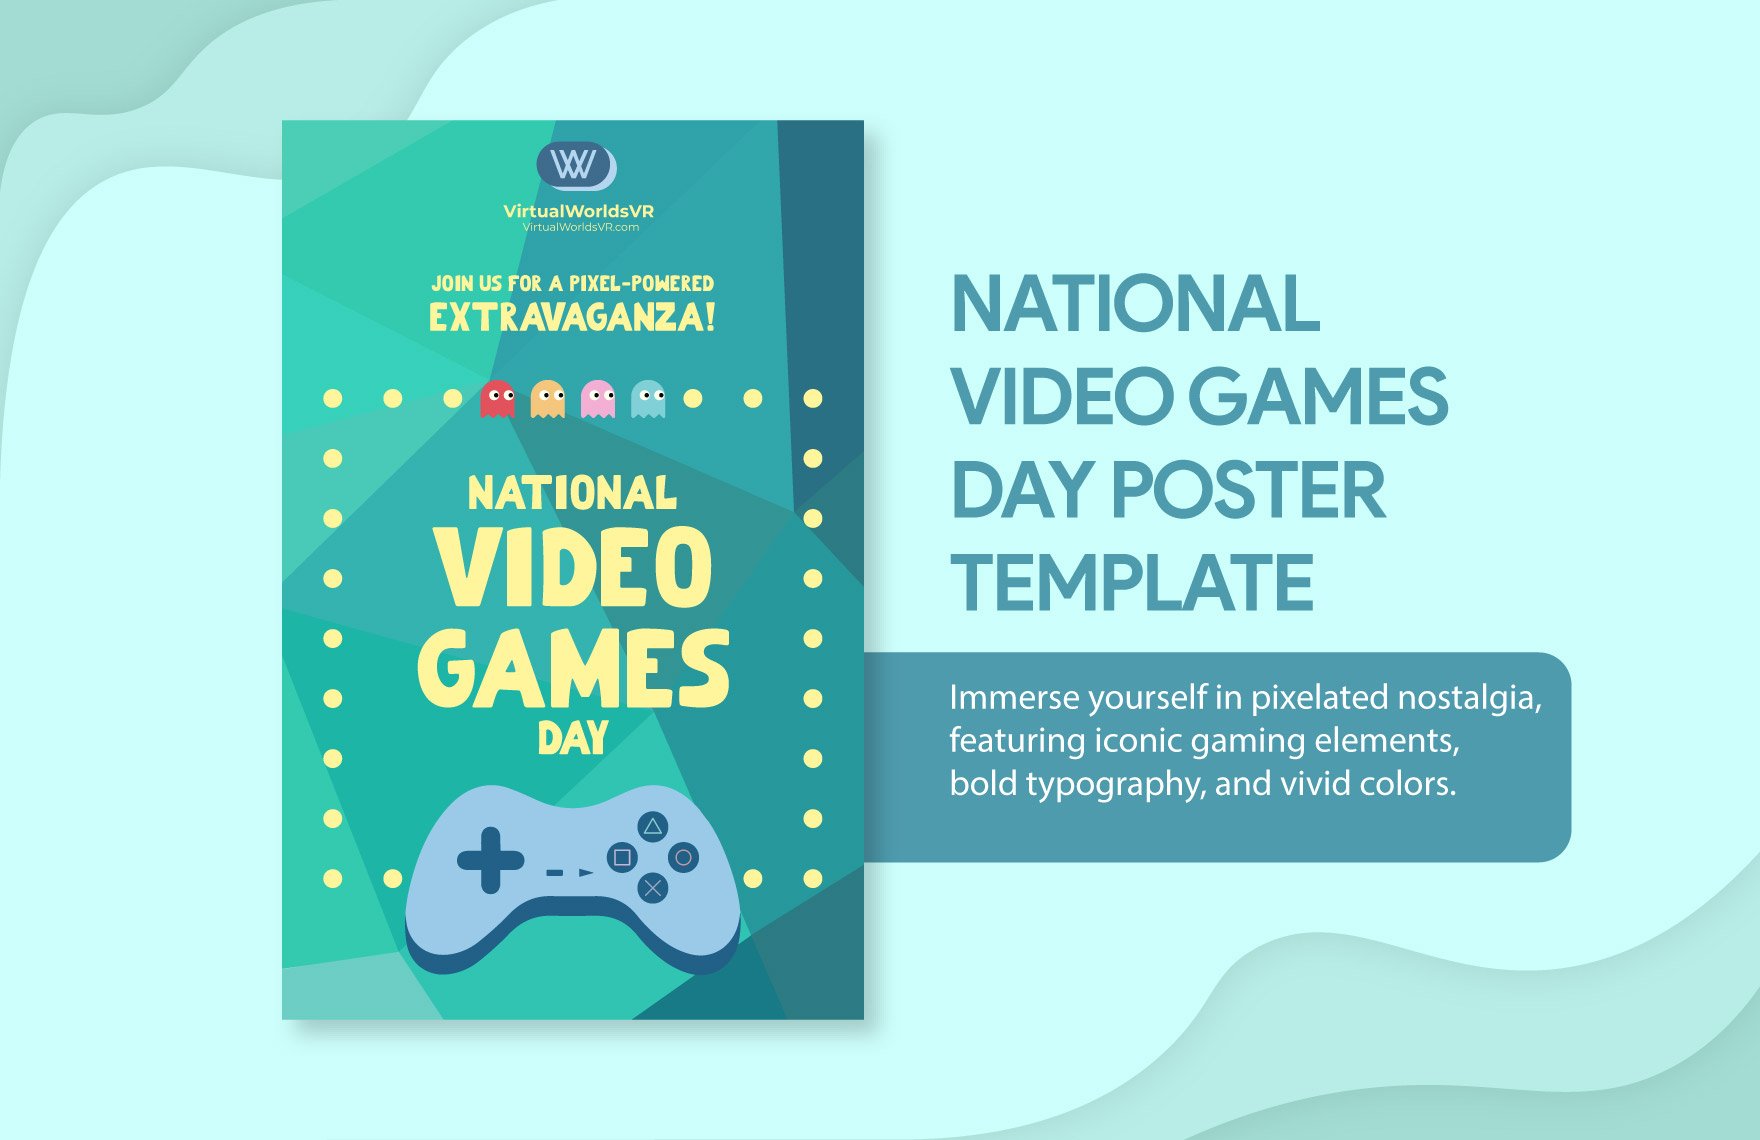 Free National Video Games Day Poster Template in Illustrator, PSD, PNG